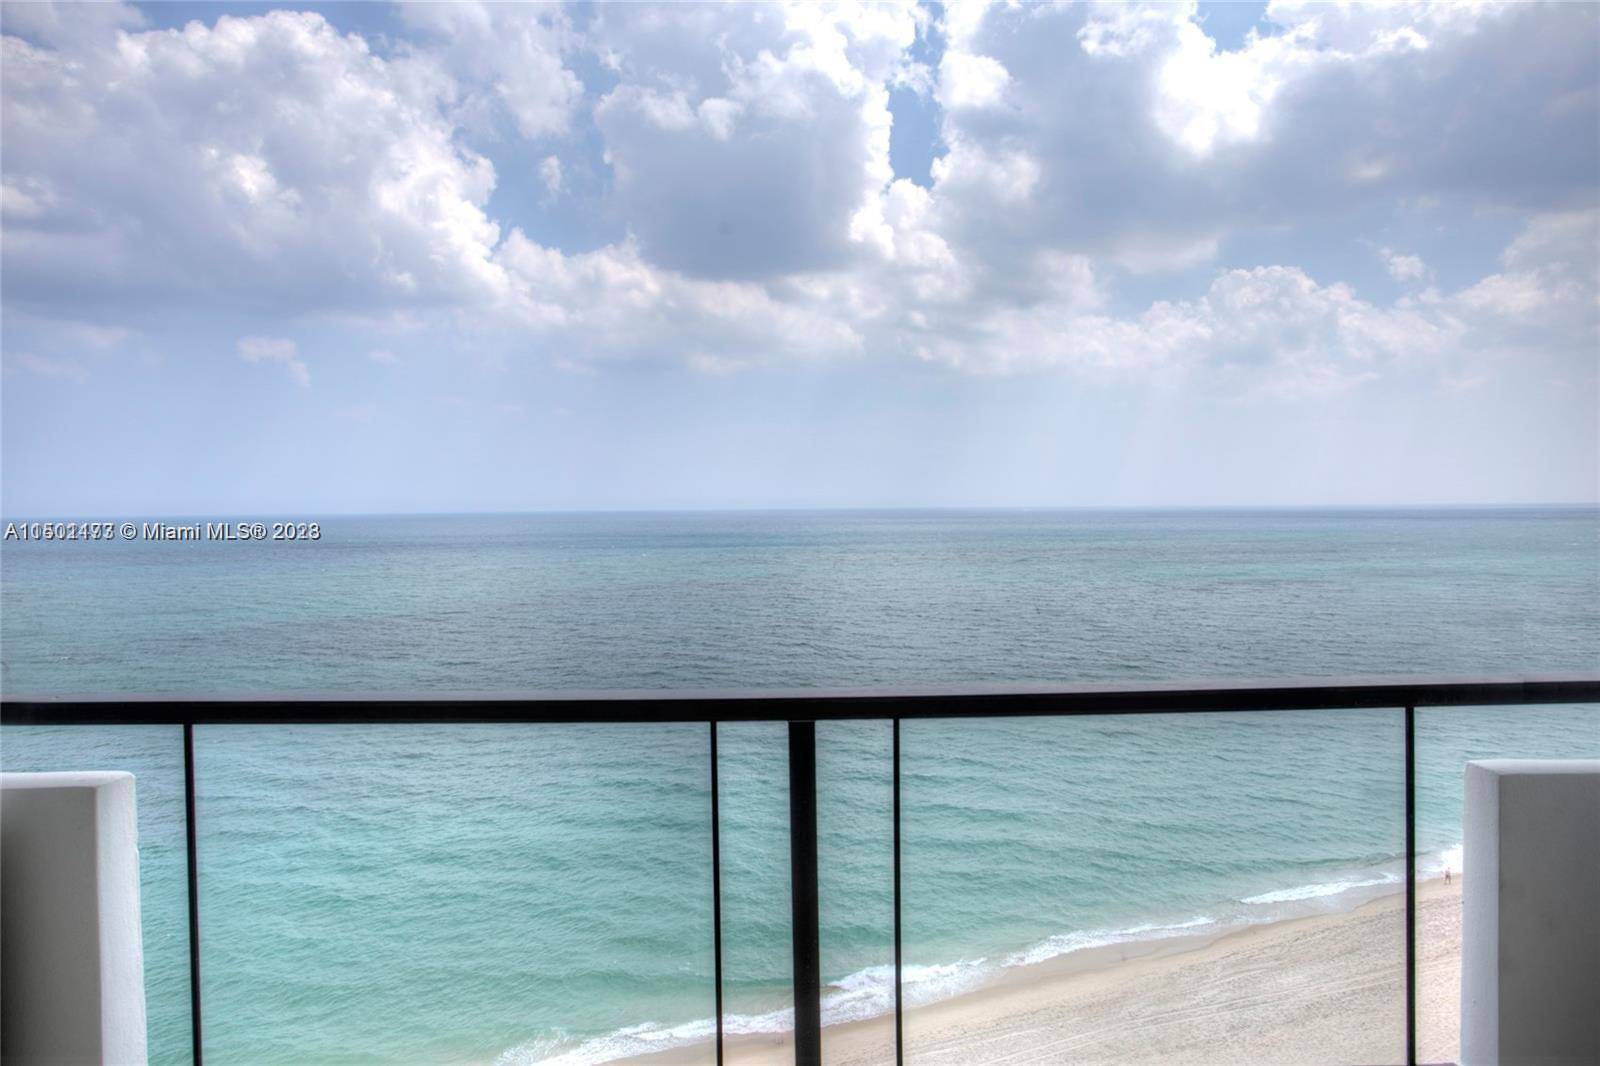 Own a slice of heaven with this 2 bedroom 2 baths condo with DIRECT OCEAN VIEW on the 15th floor.